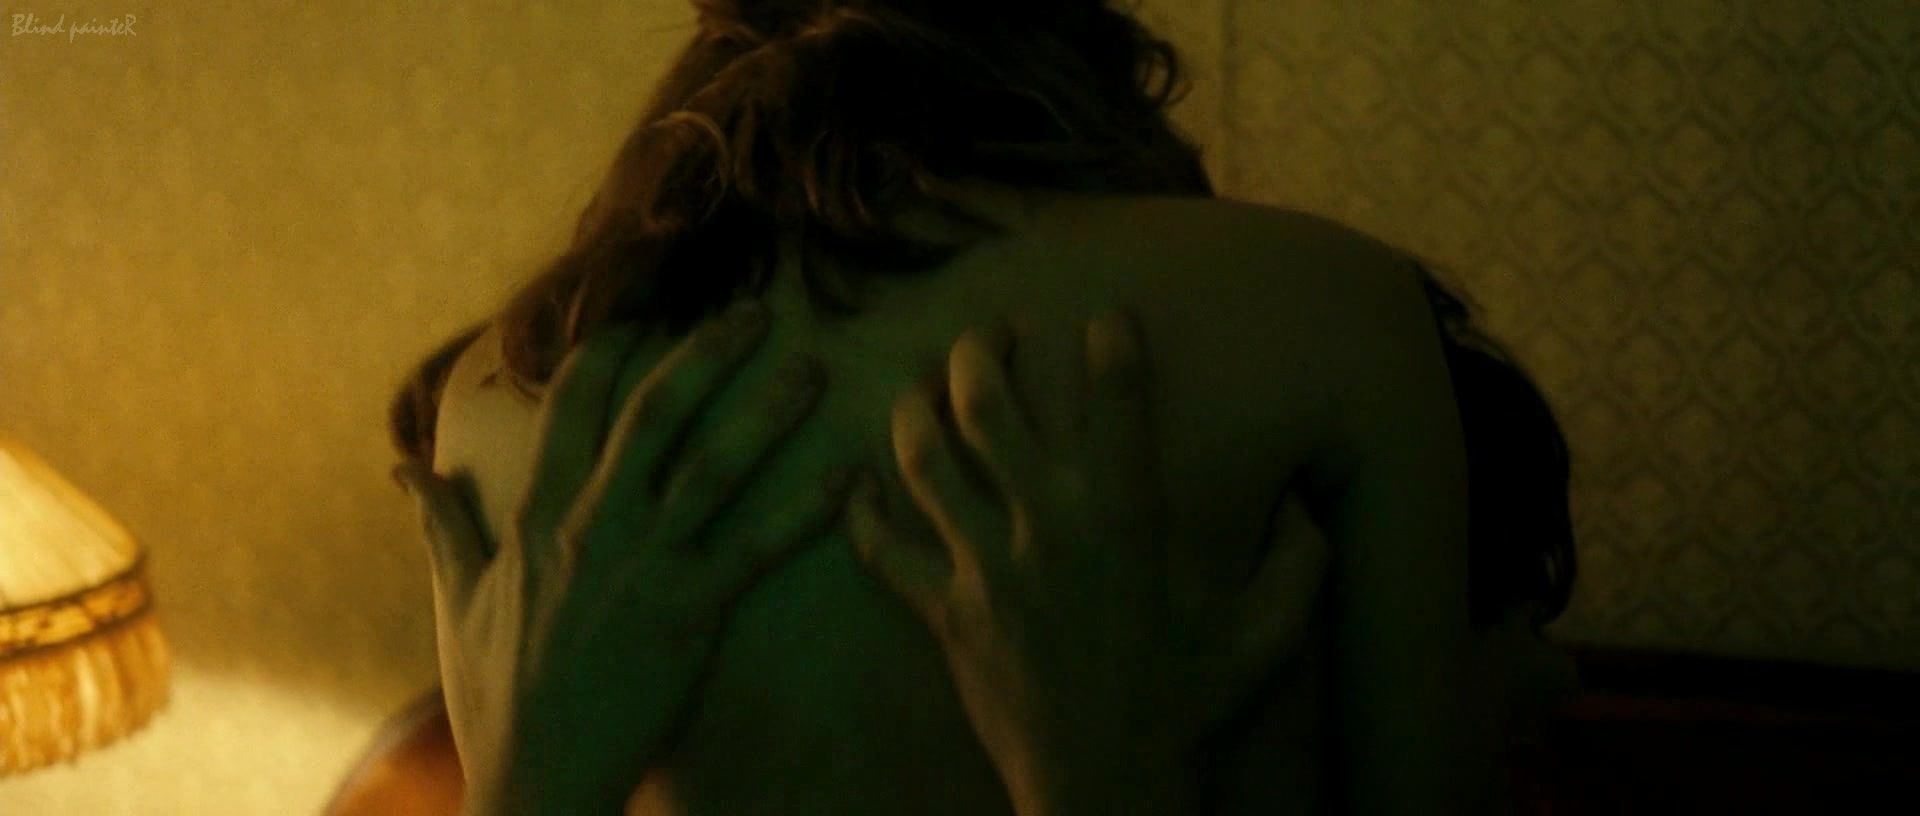 Thot Kristen Stewart nude - On The Road S1E1 Made